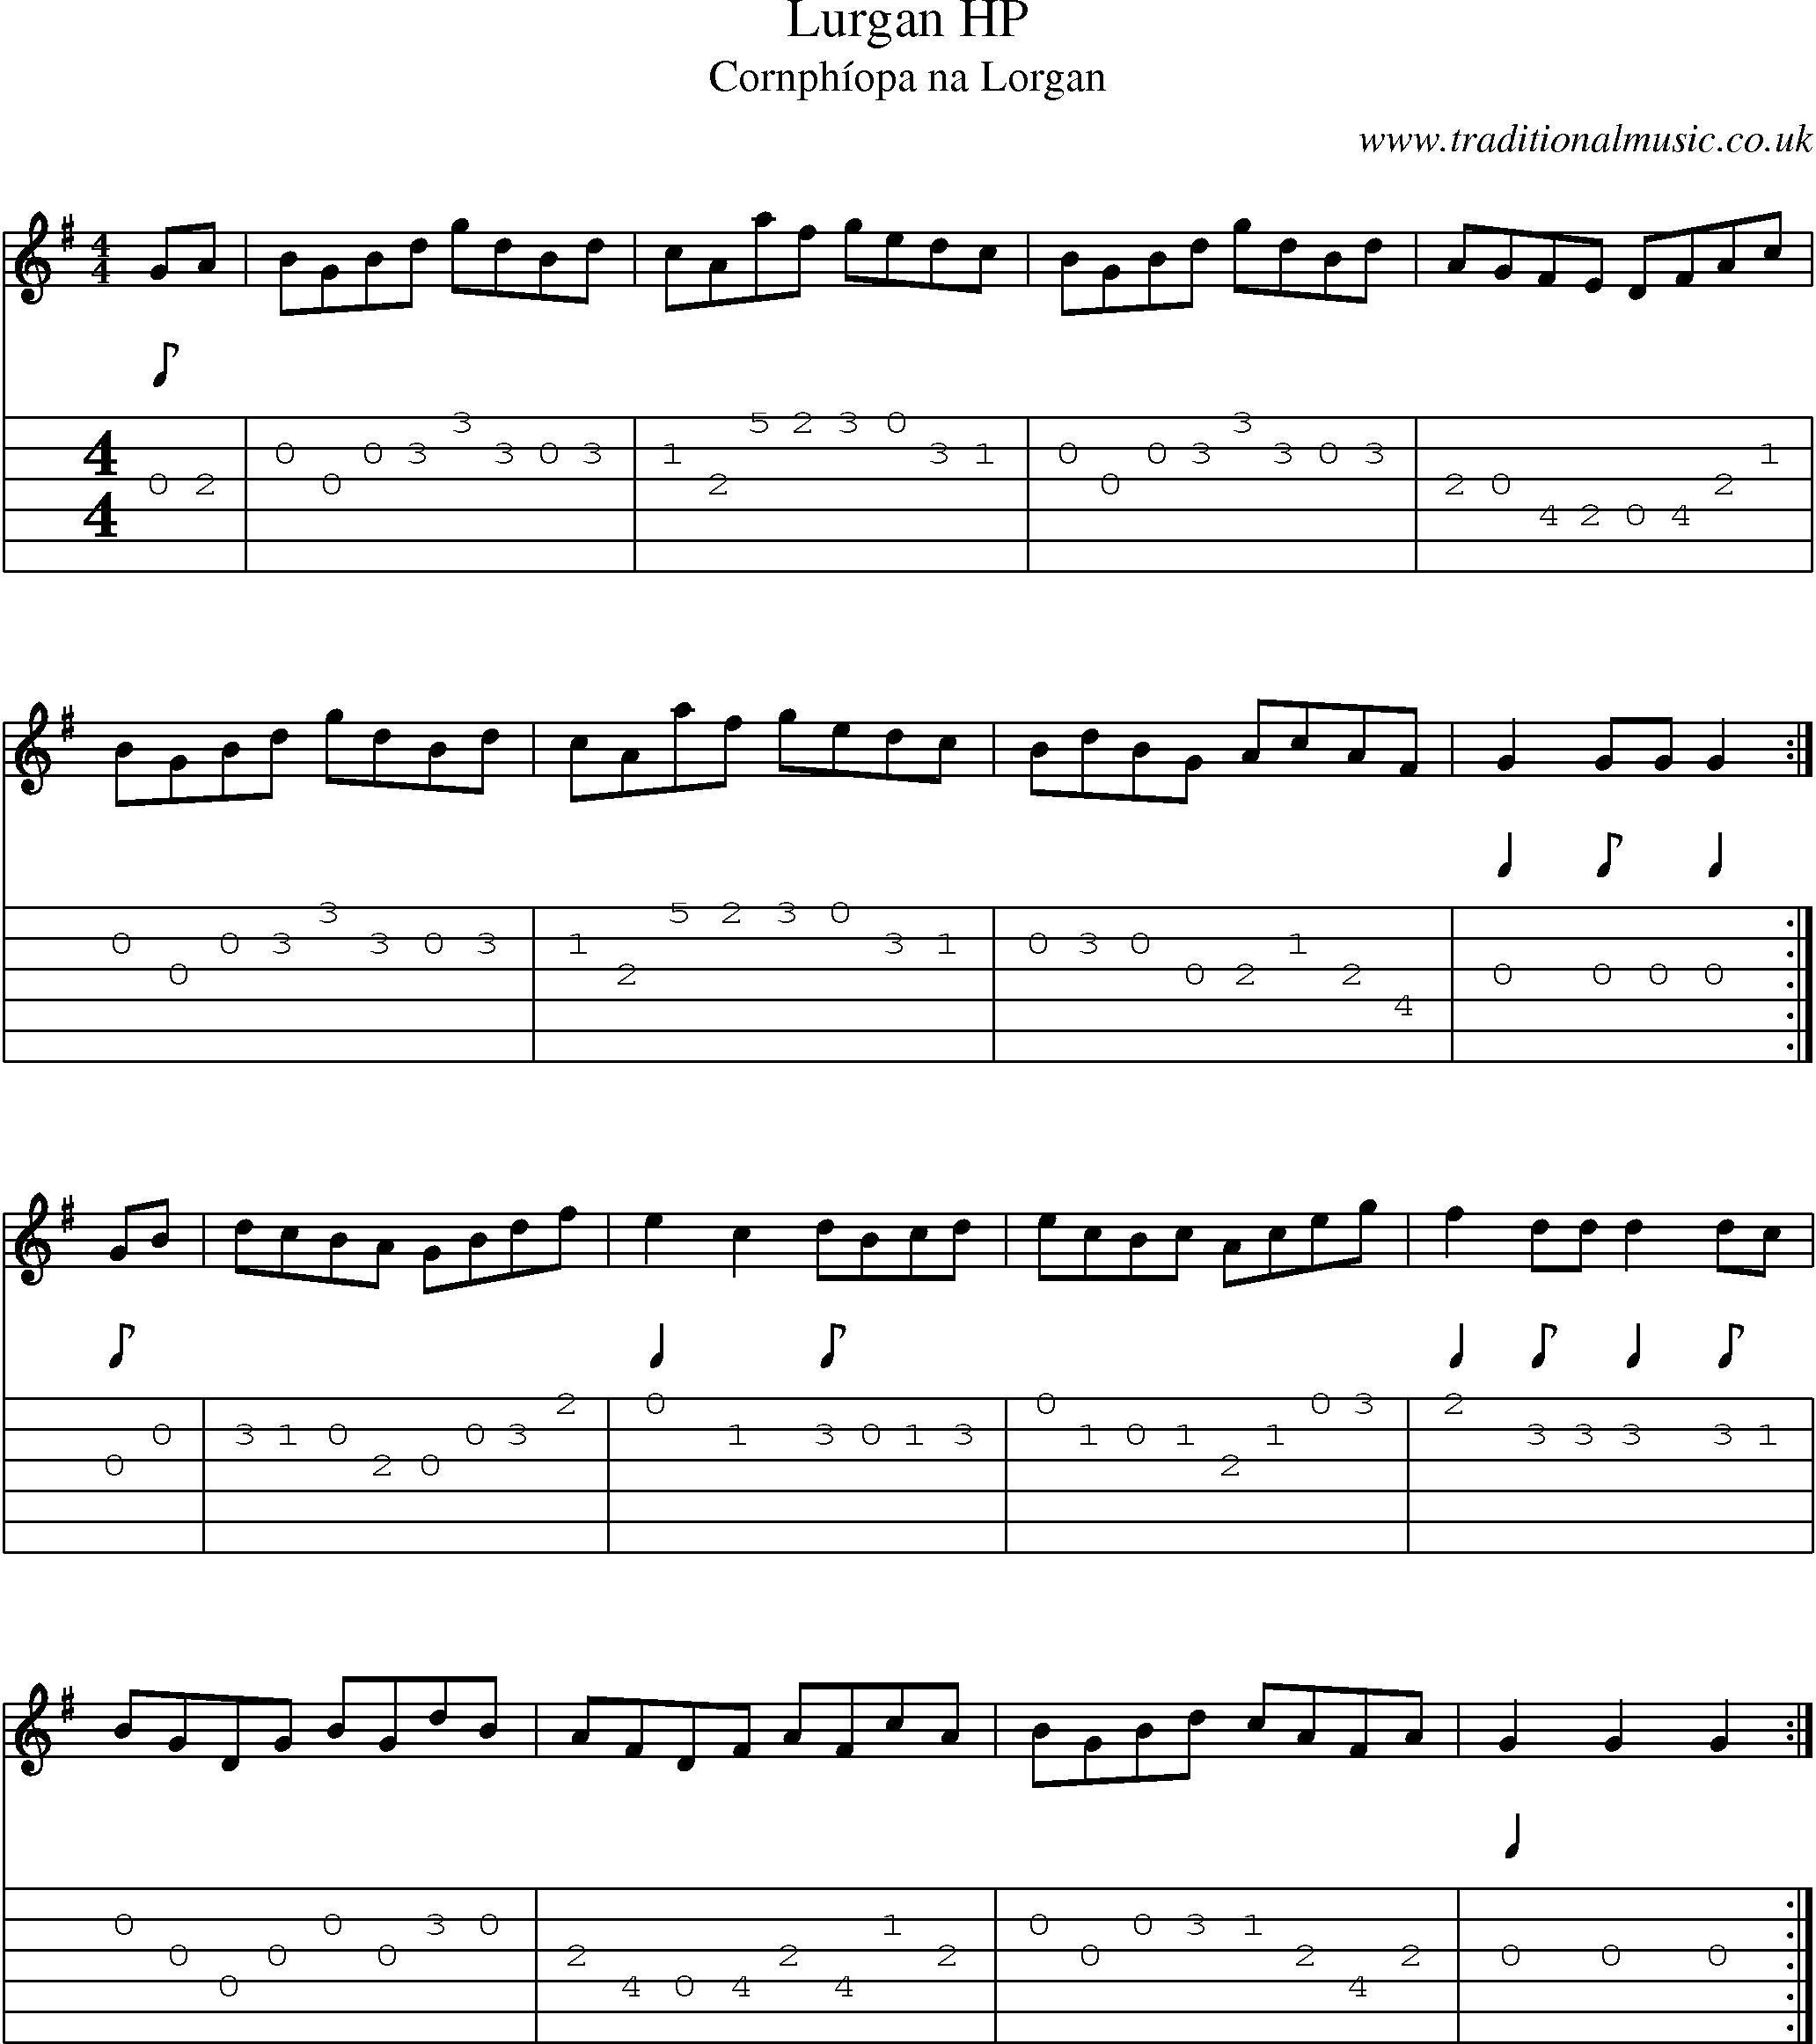 Music Score and Guitar Tabs for Lurgan